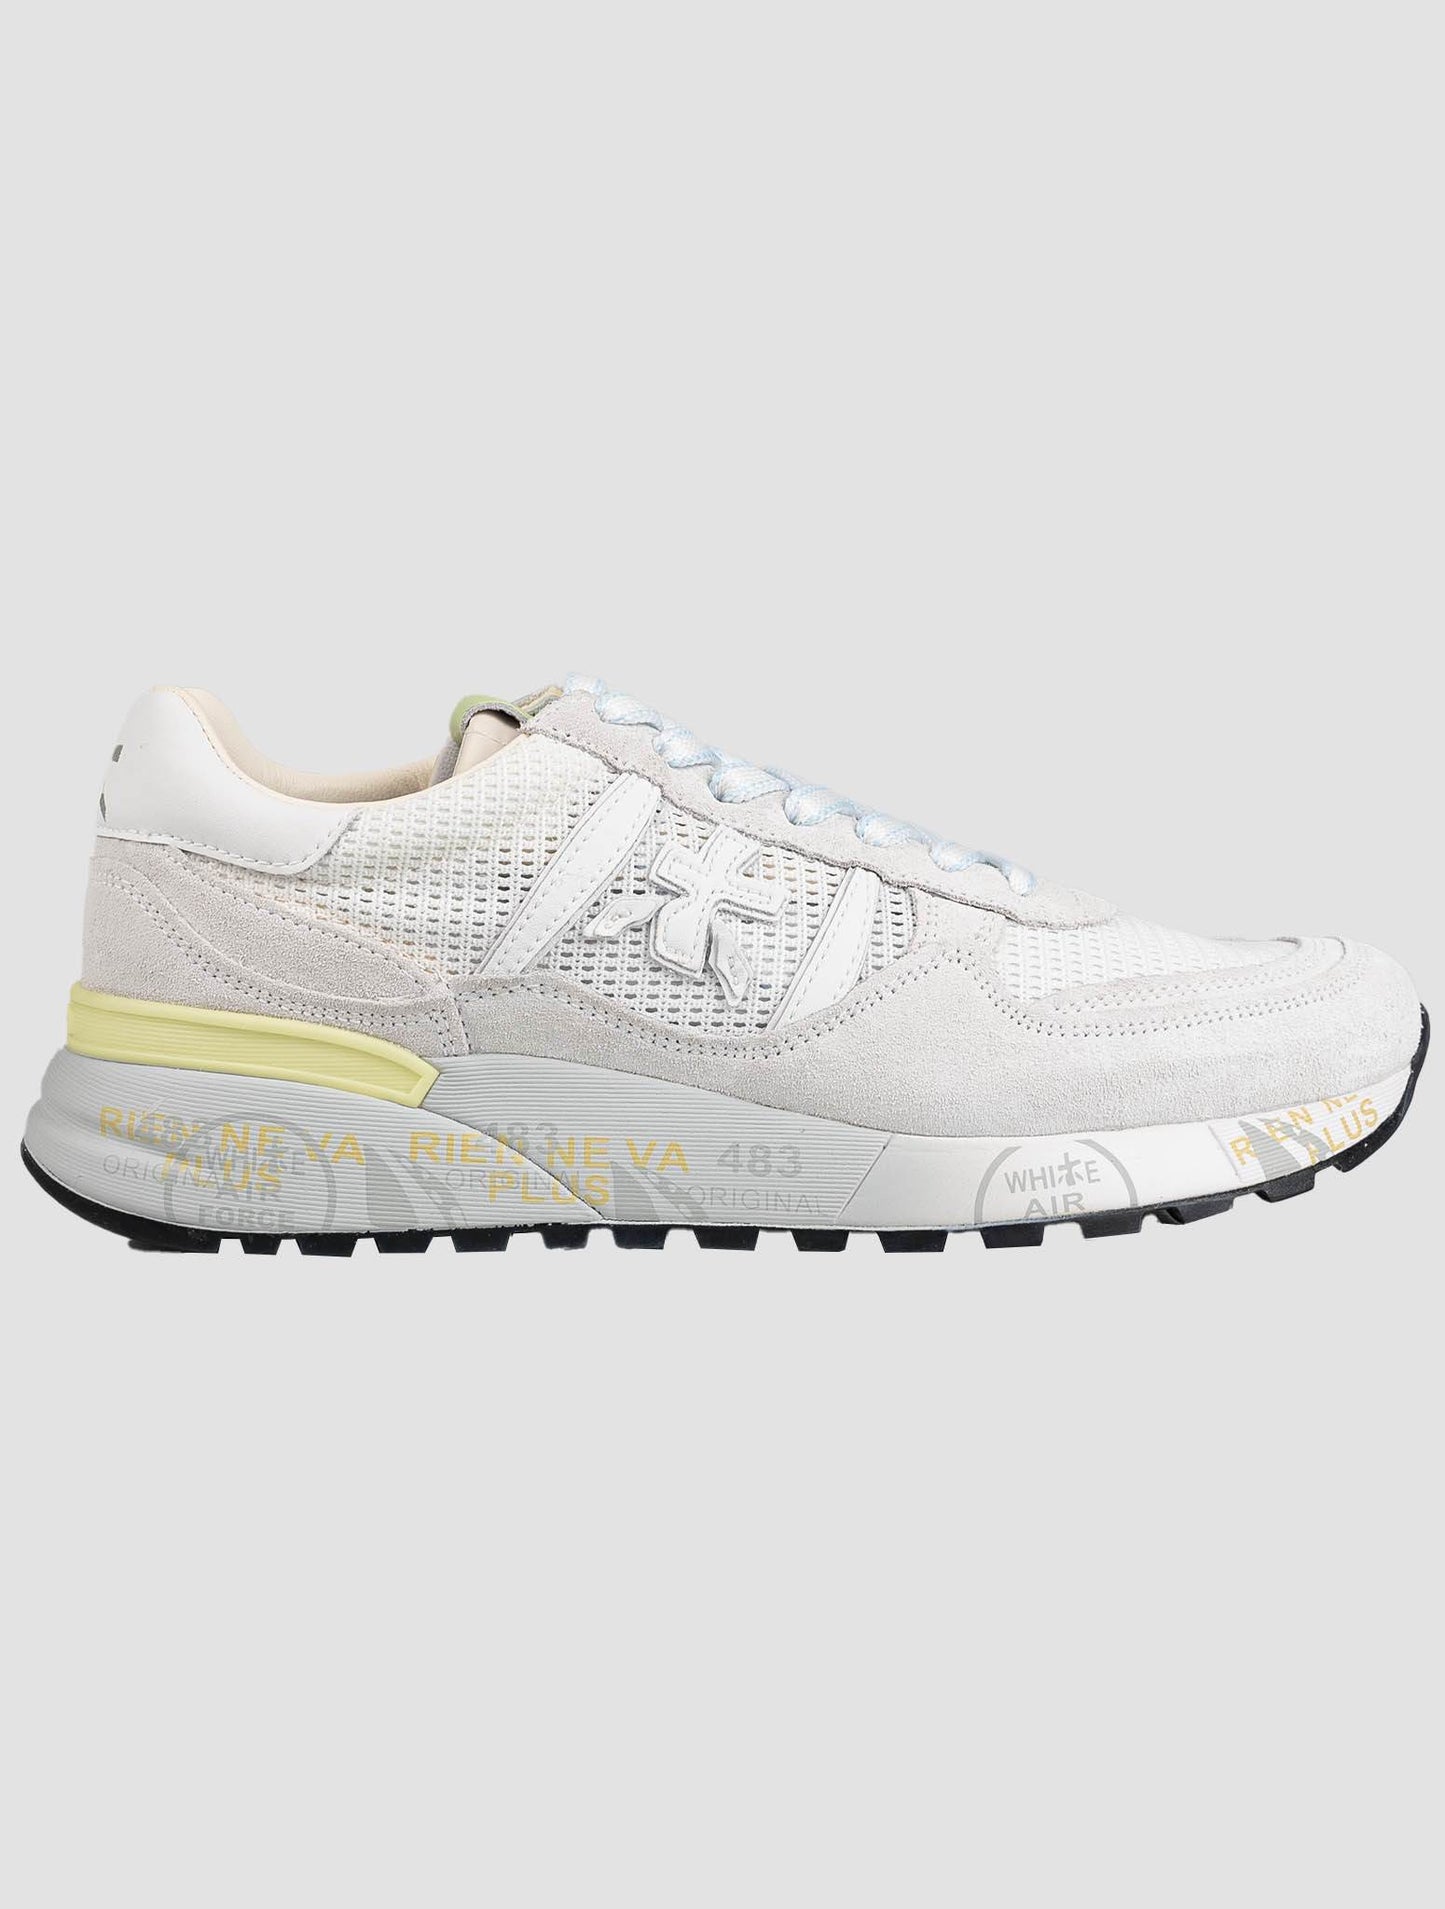 Premiata Gray Leather Suede Pl Pa Sneakers